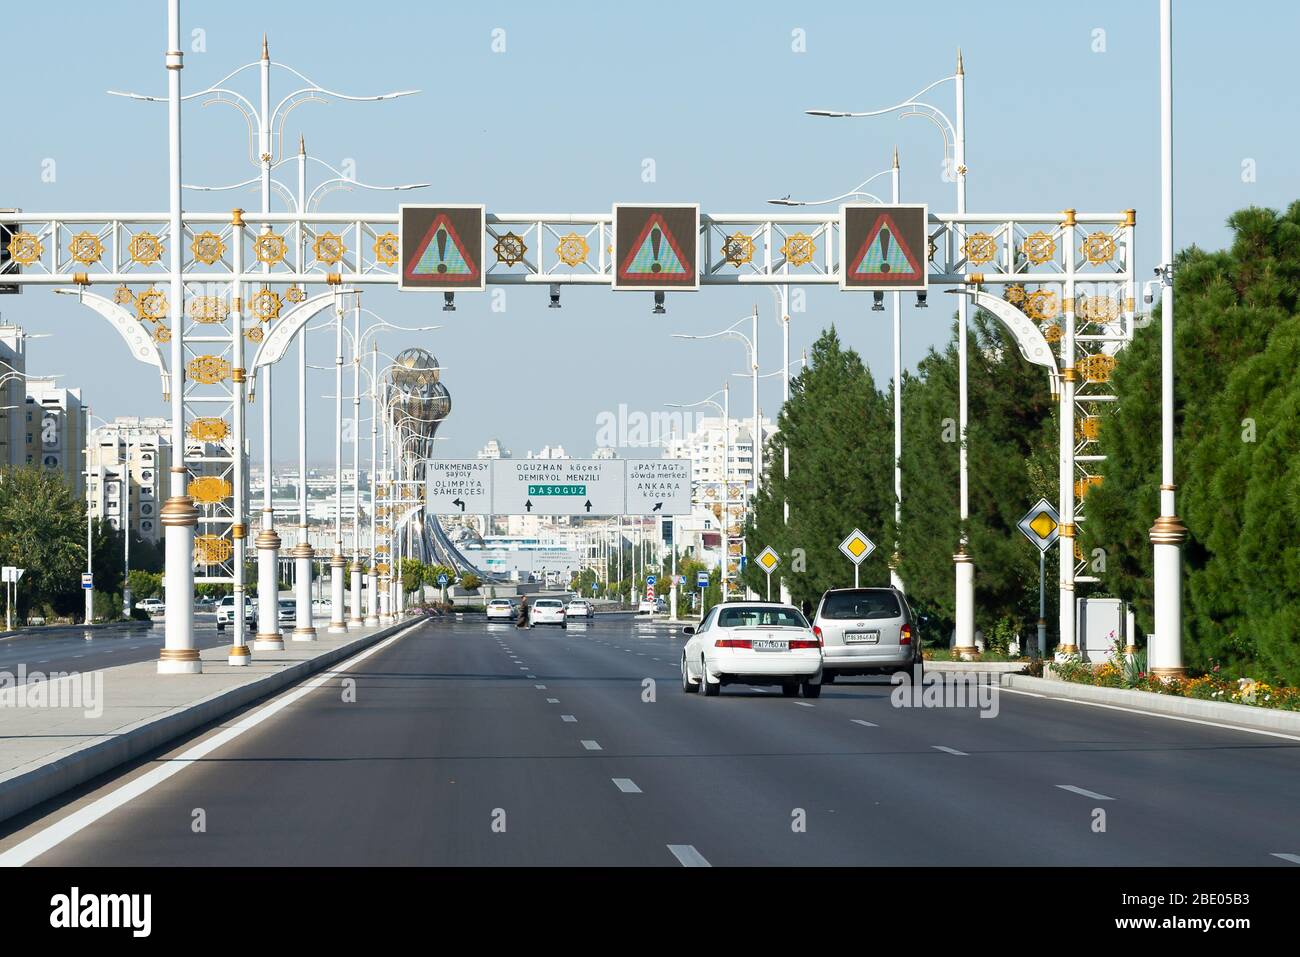 Avenue with overhead road signs decorated with gold. Street traffic or white carst. Ornamented lamp posts. Decorative gold Oguzkhan star. Stock Photo